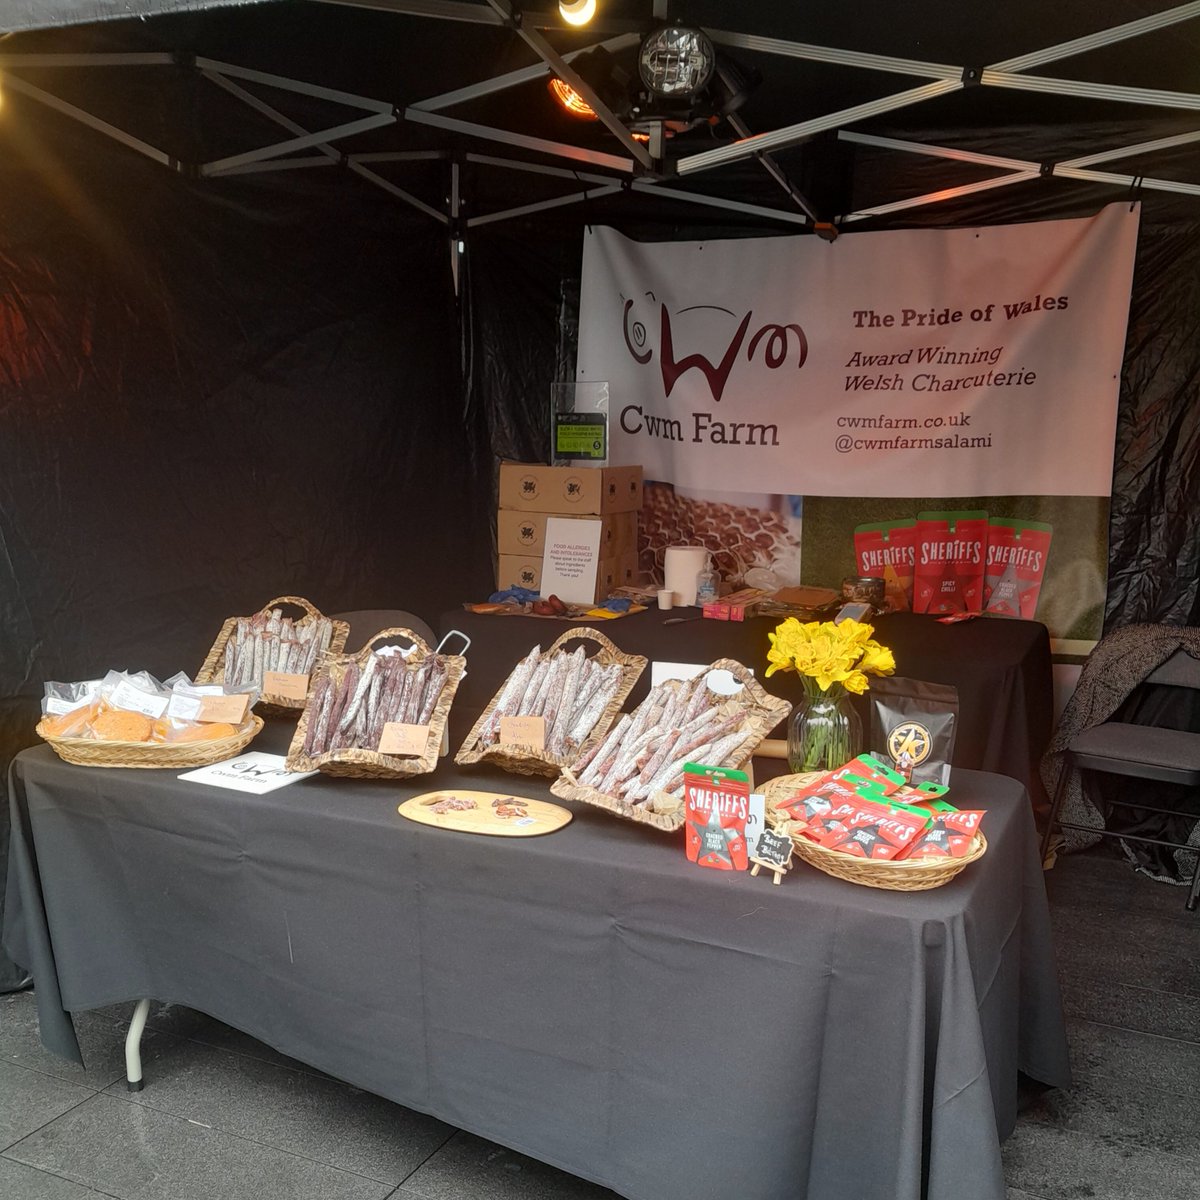 All set up and ready to go Spitfields Market London Come and say hello tomorrow if your in Londo. Lamb Street 10am - 4pm